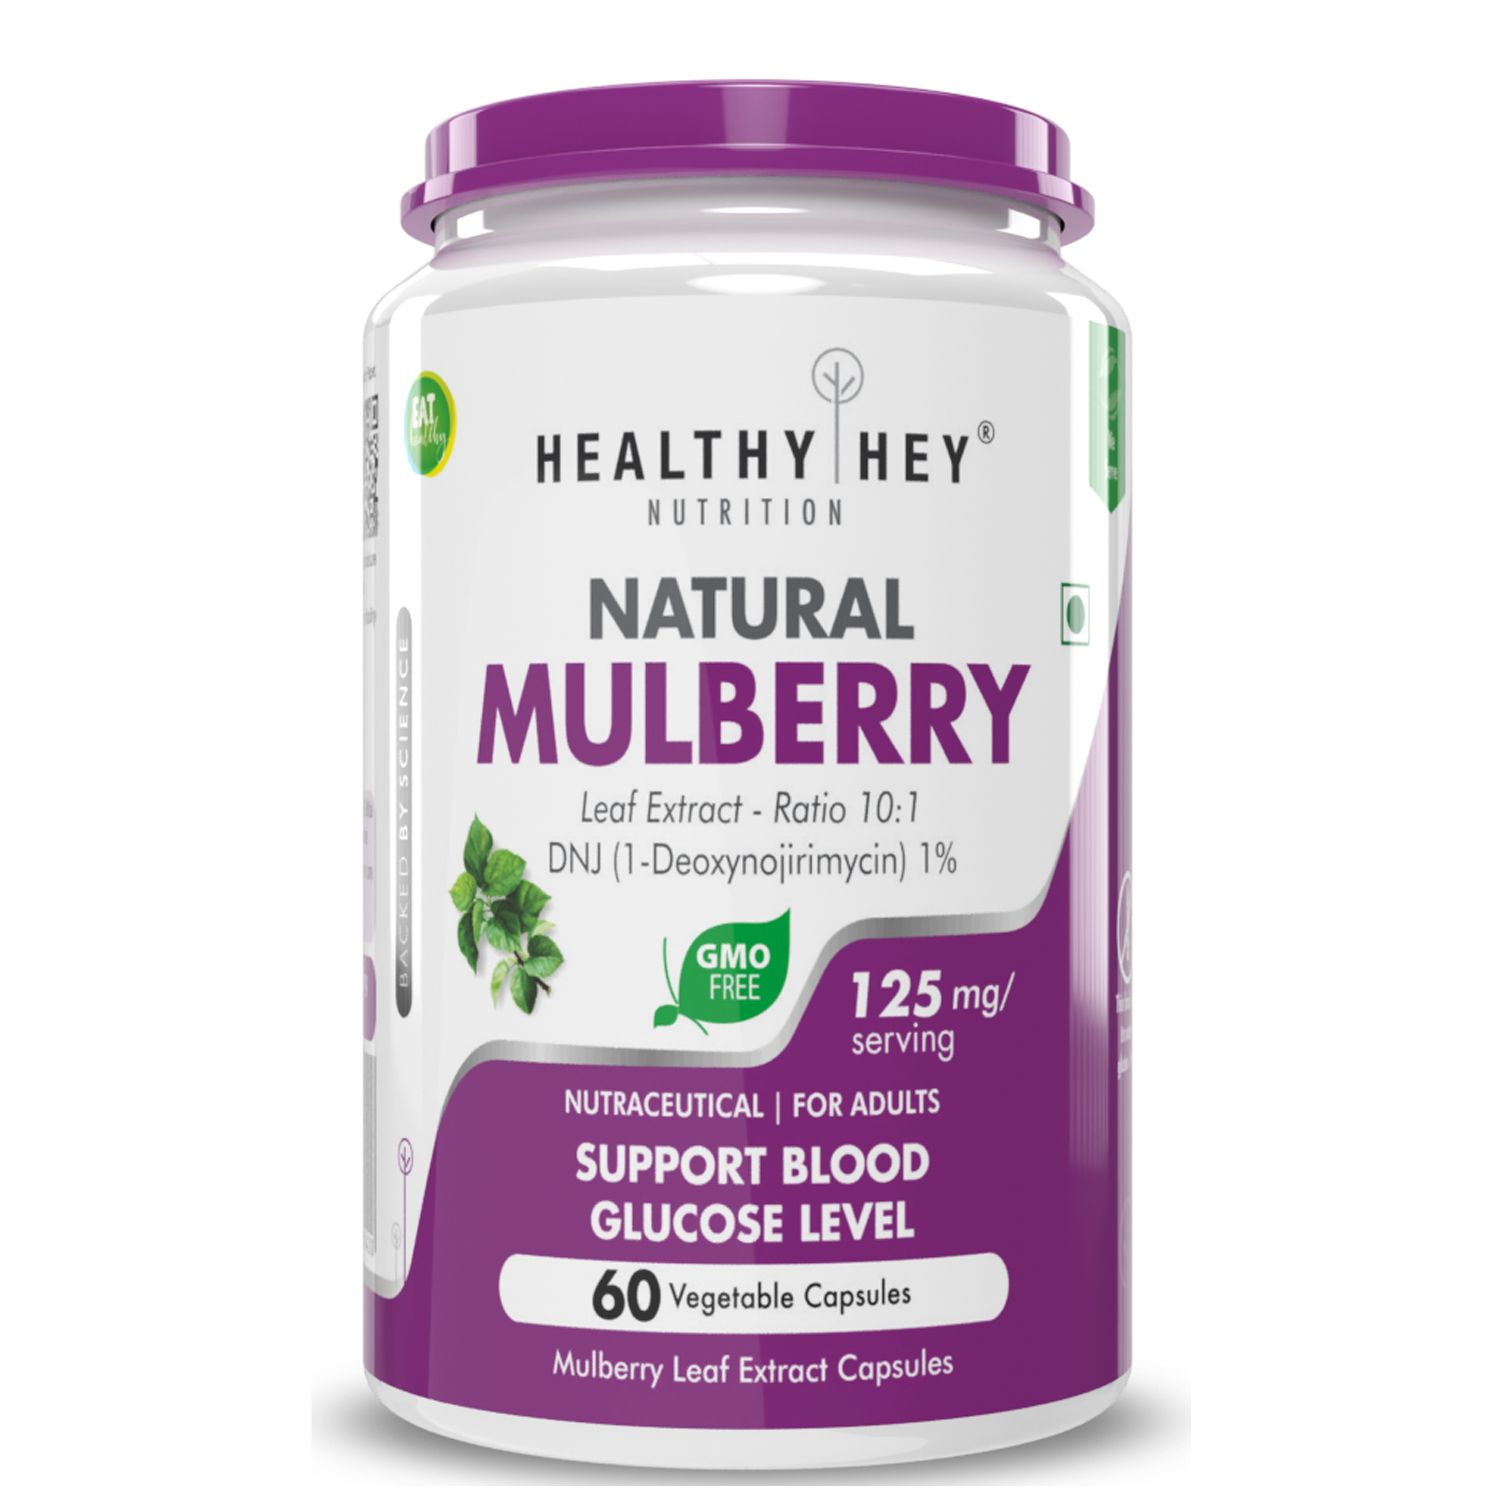 HealthyHey Nutrition Natural Mulberry Leaf Extract (60 vegetable capsules)